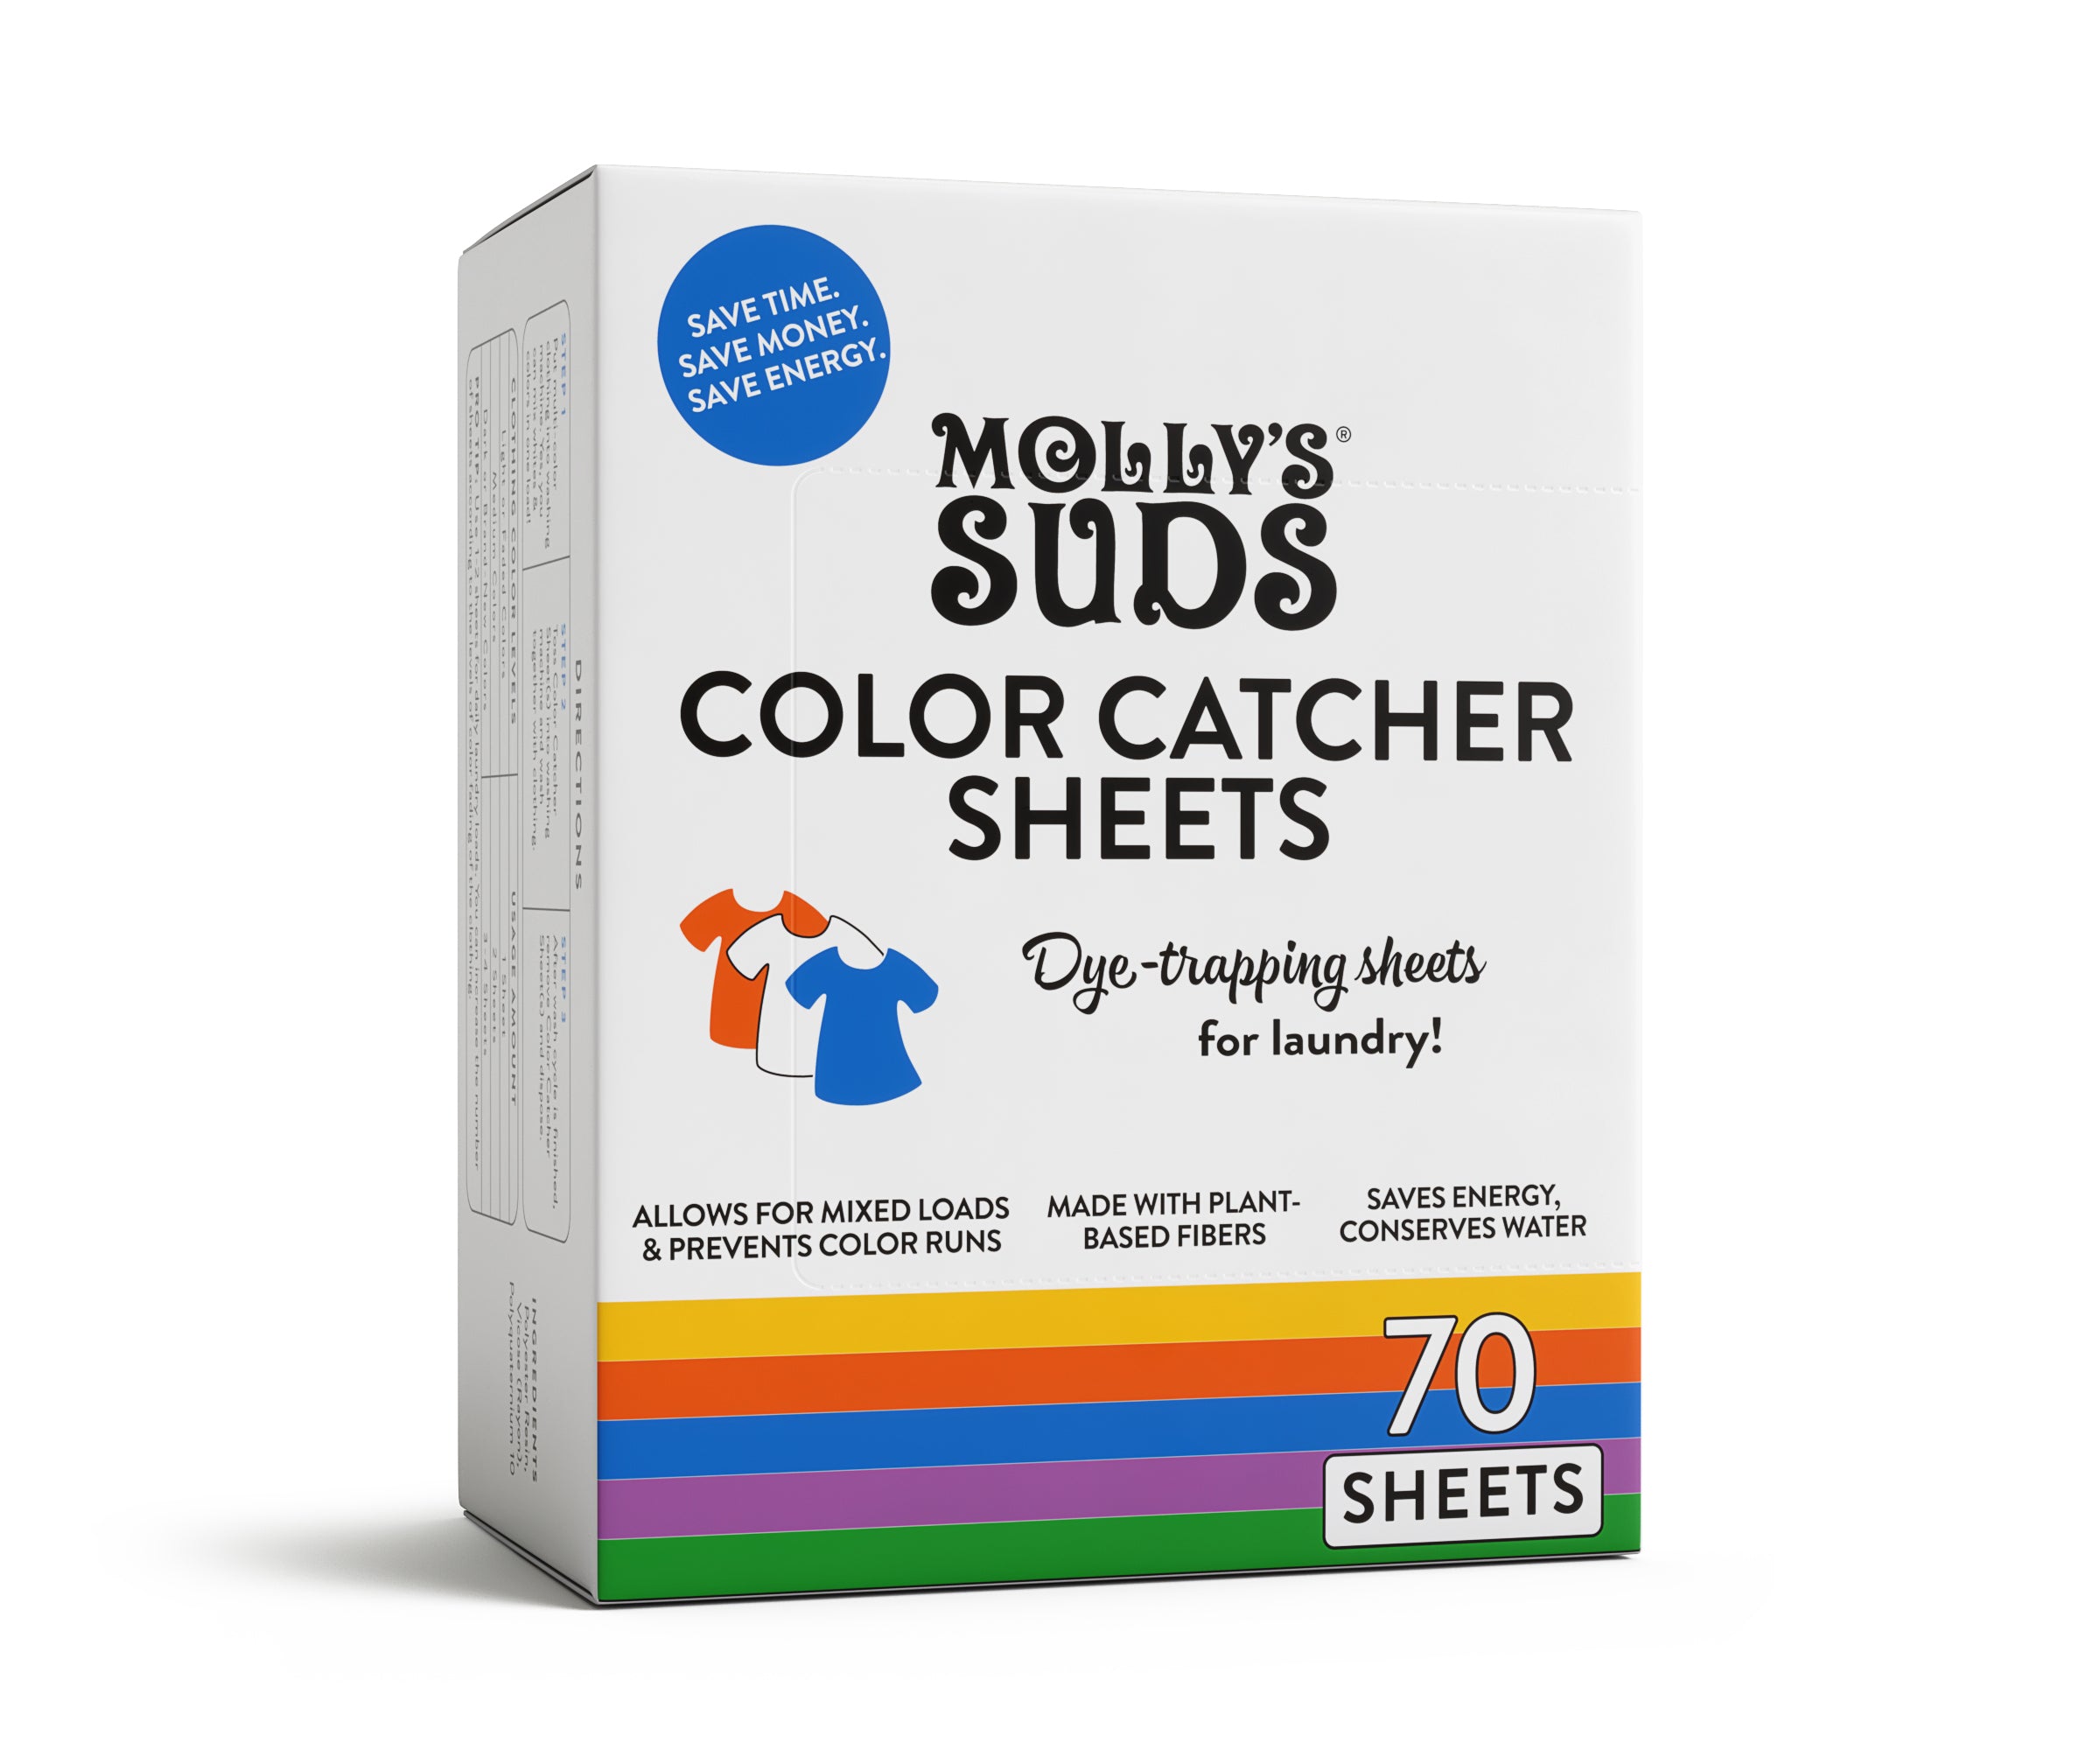 Color Catcher Sheets for Laundry, Molly's Suds